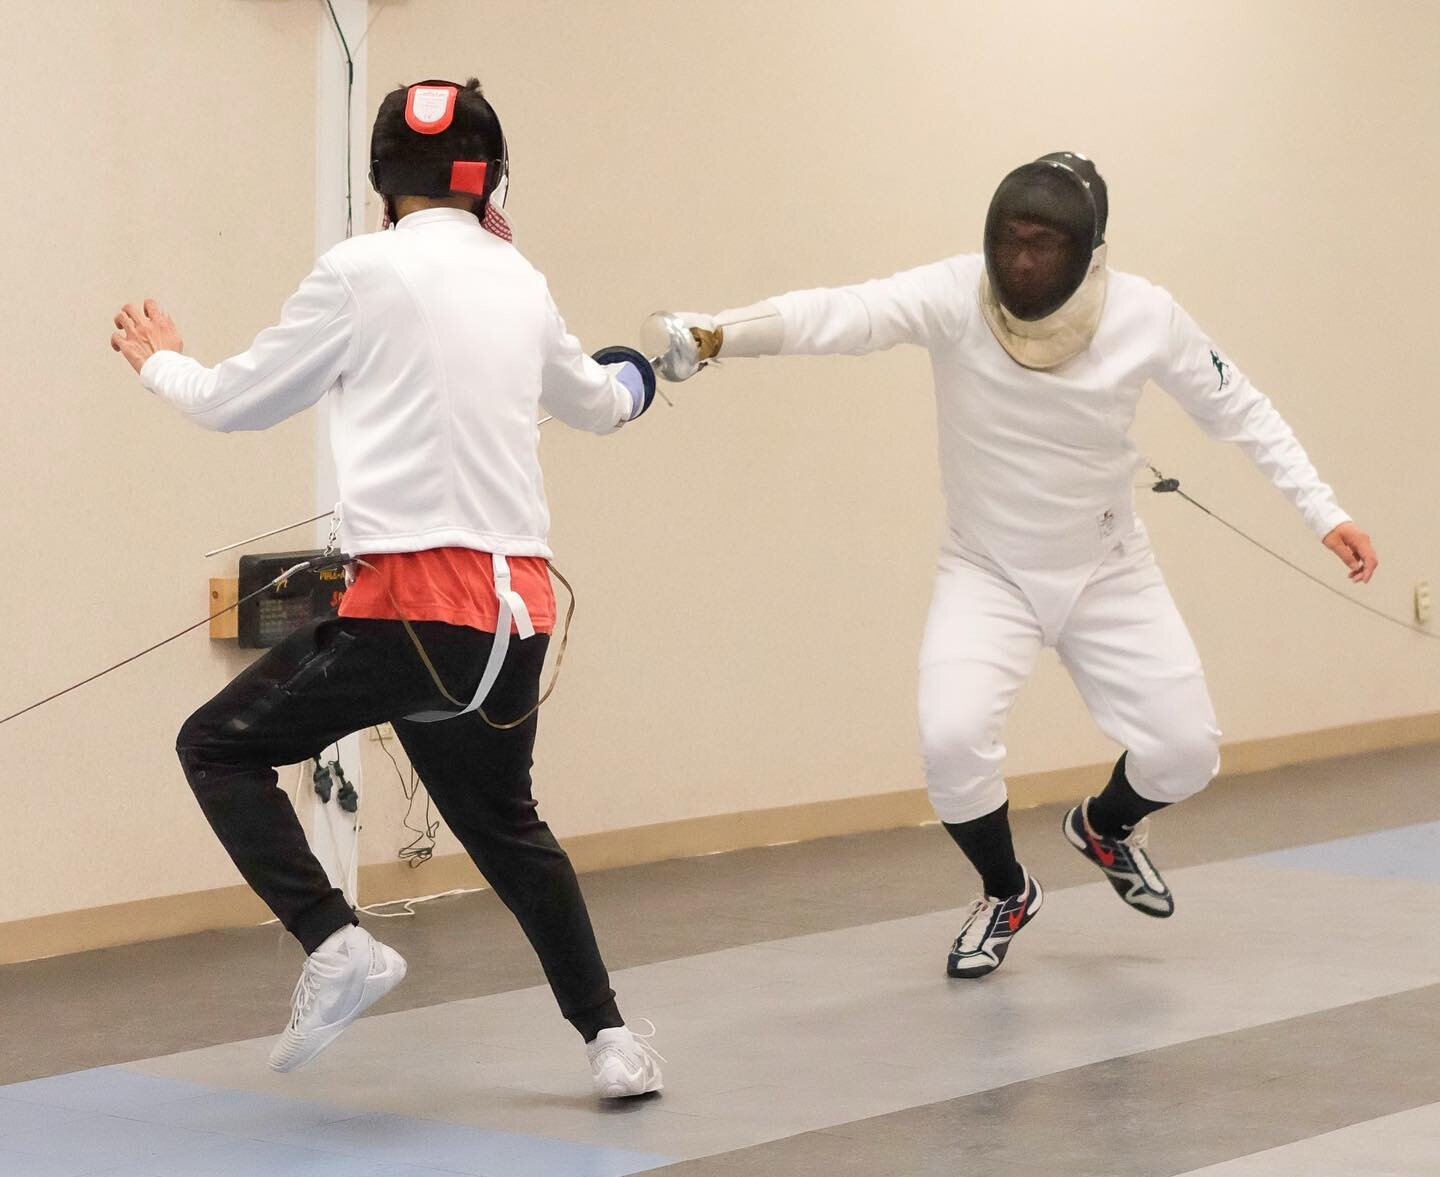 &ldquo;If it doesn&rsquo;t challenge you, it won&rsquo;t change you.&rdquo;

&ndash; Fred Devito 
.
.
.
. 
.
.
.
. 

#manchenfencing  #sport #athlete #fencing #foilfencing #saberfencing #epeefencing #duel #sportphotography #fencingmask #fencingblade 